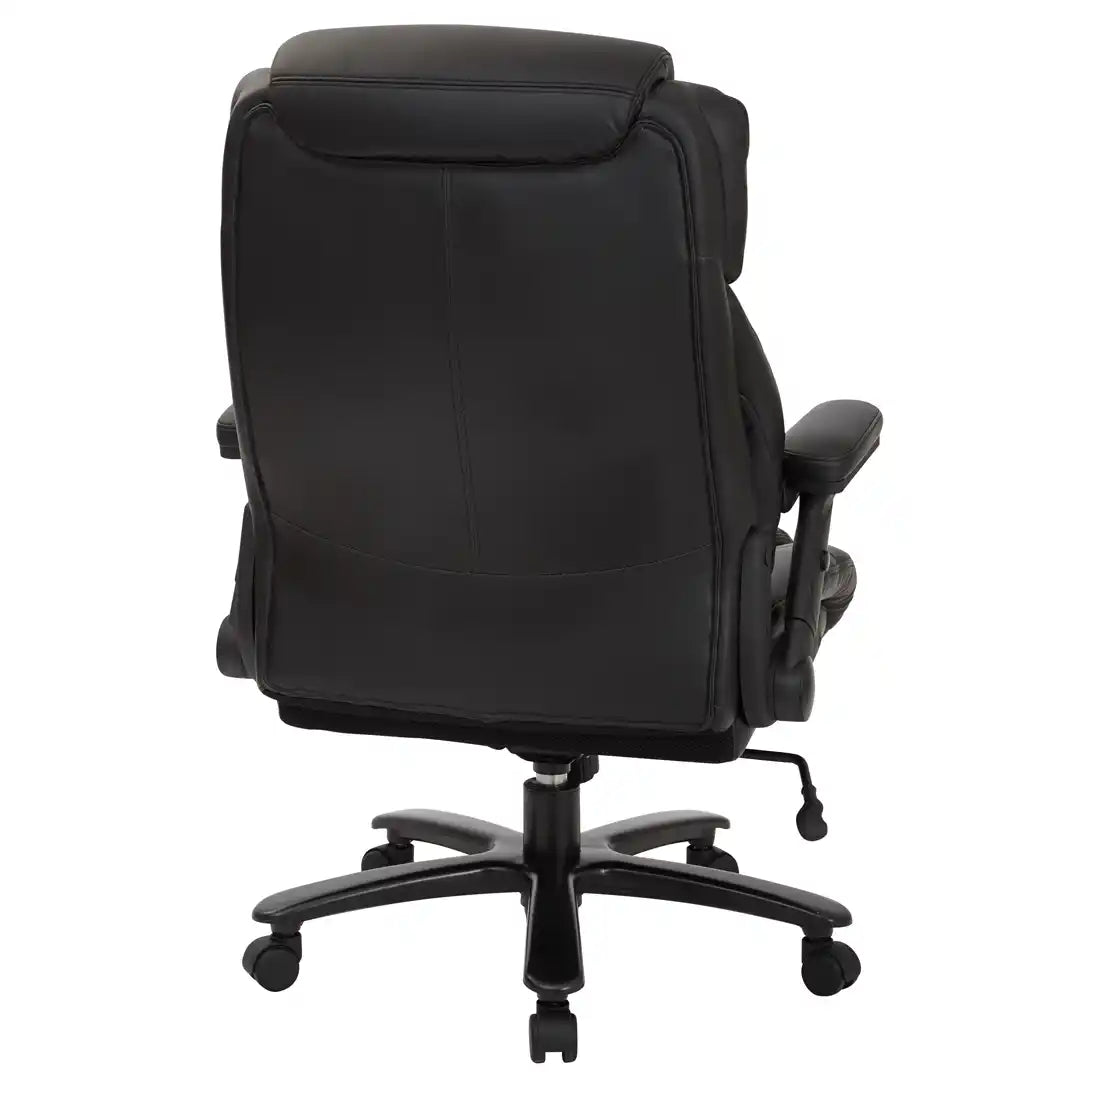 Proline II Big and Tall Deluxe High Back Executive Chair - 39200 - Functional Office Furniture - 39200